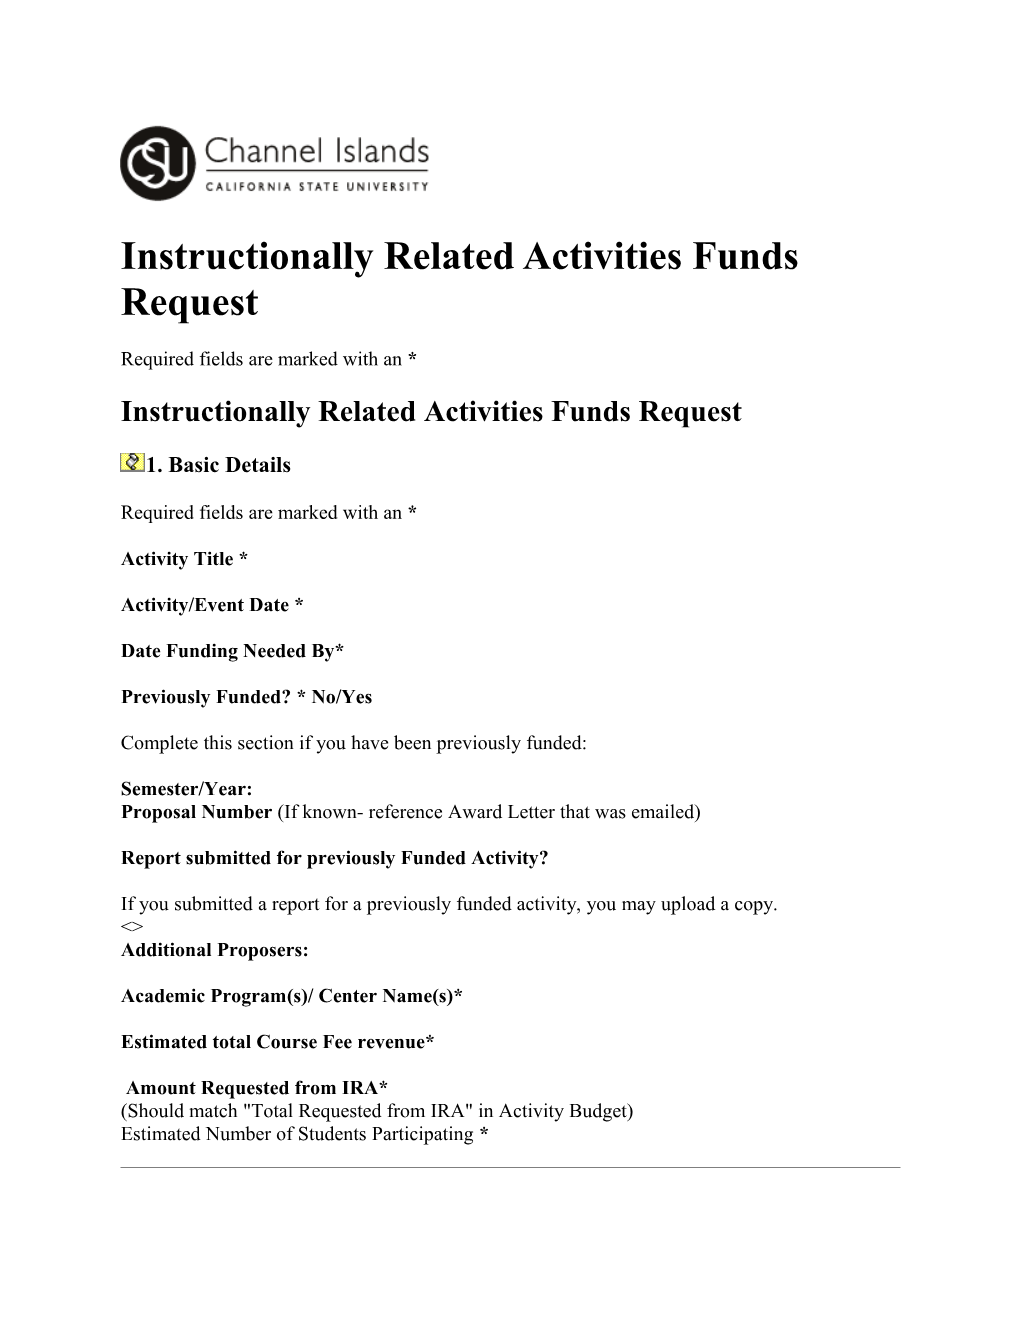 Instructionally Related Activities Funds Request